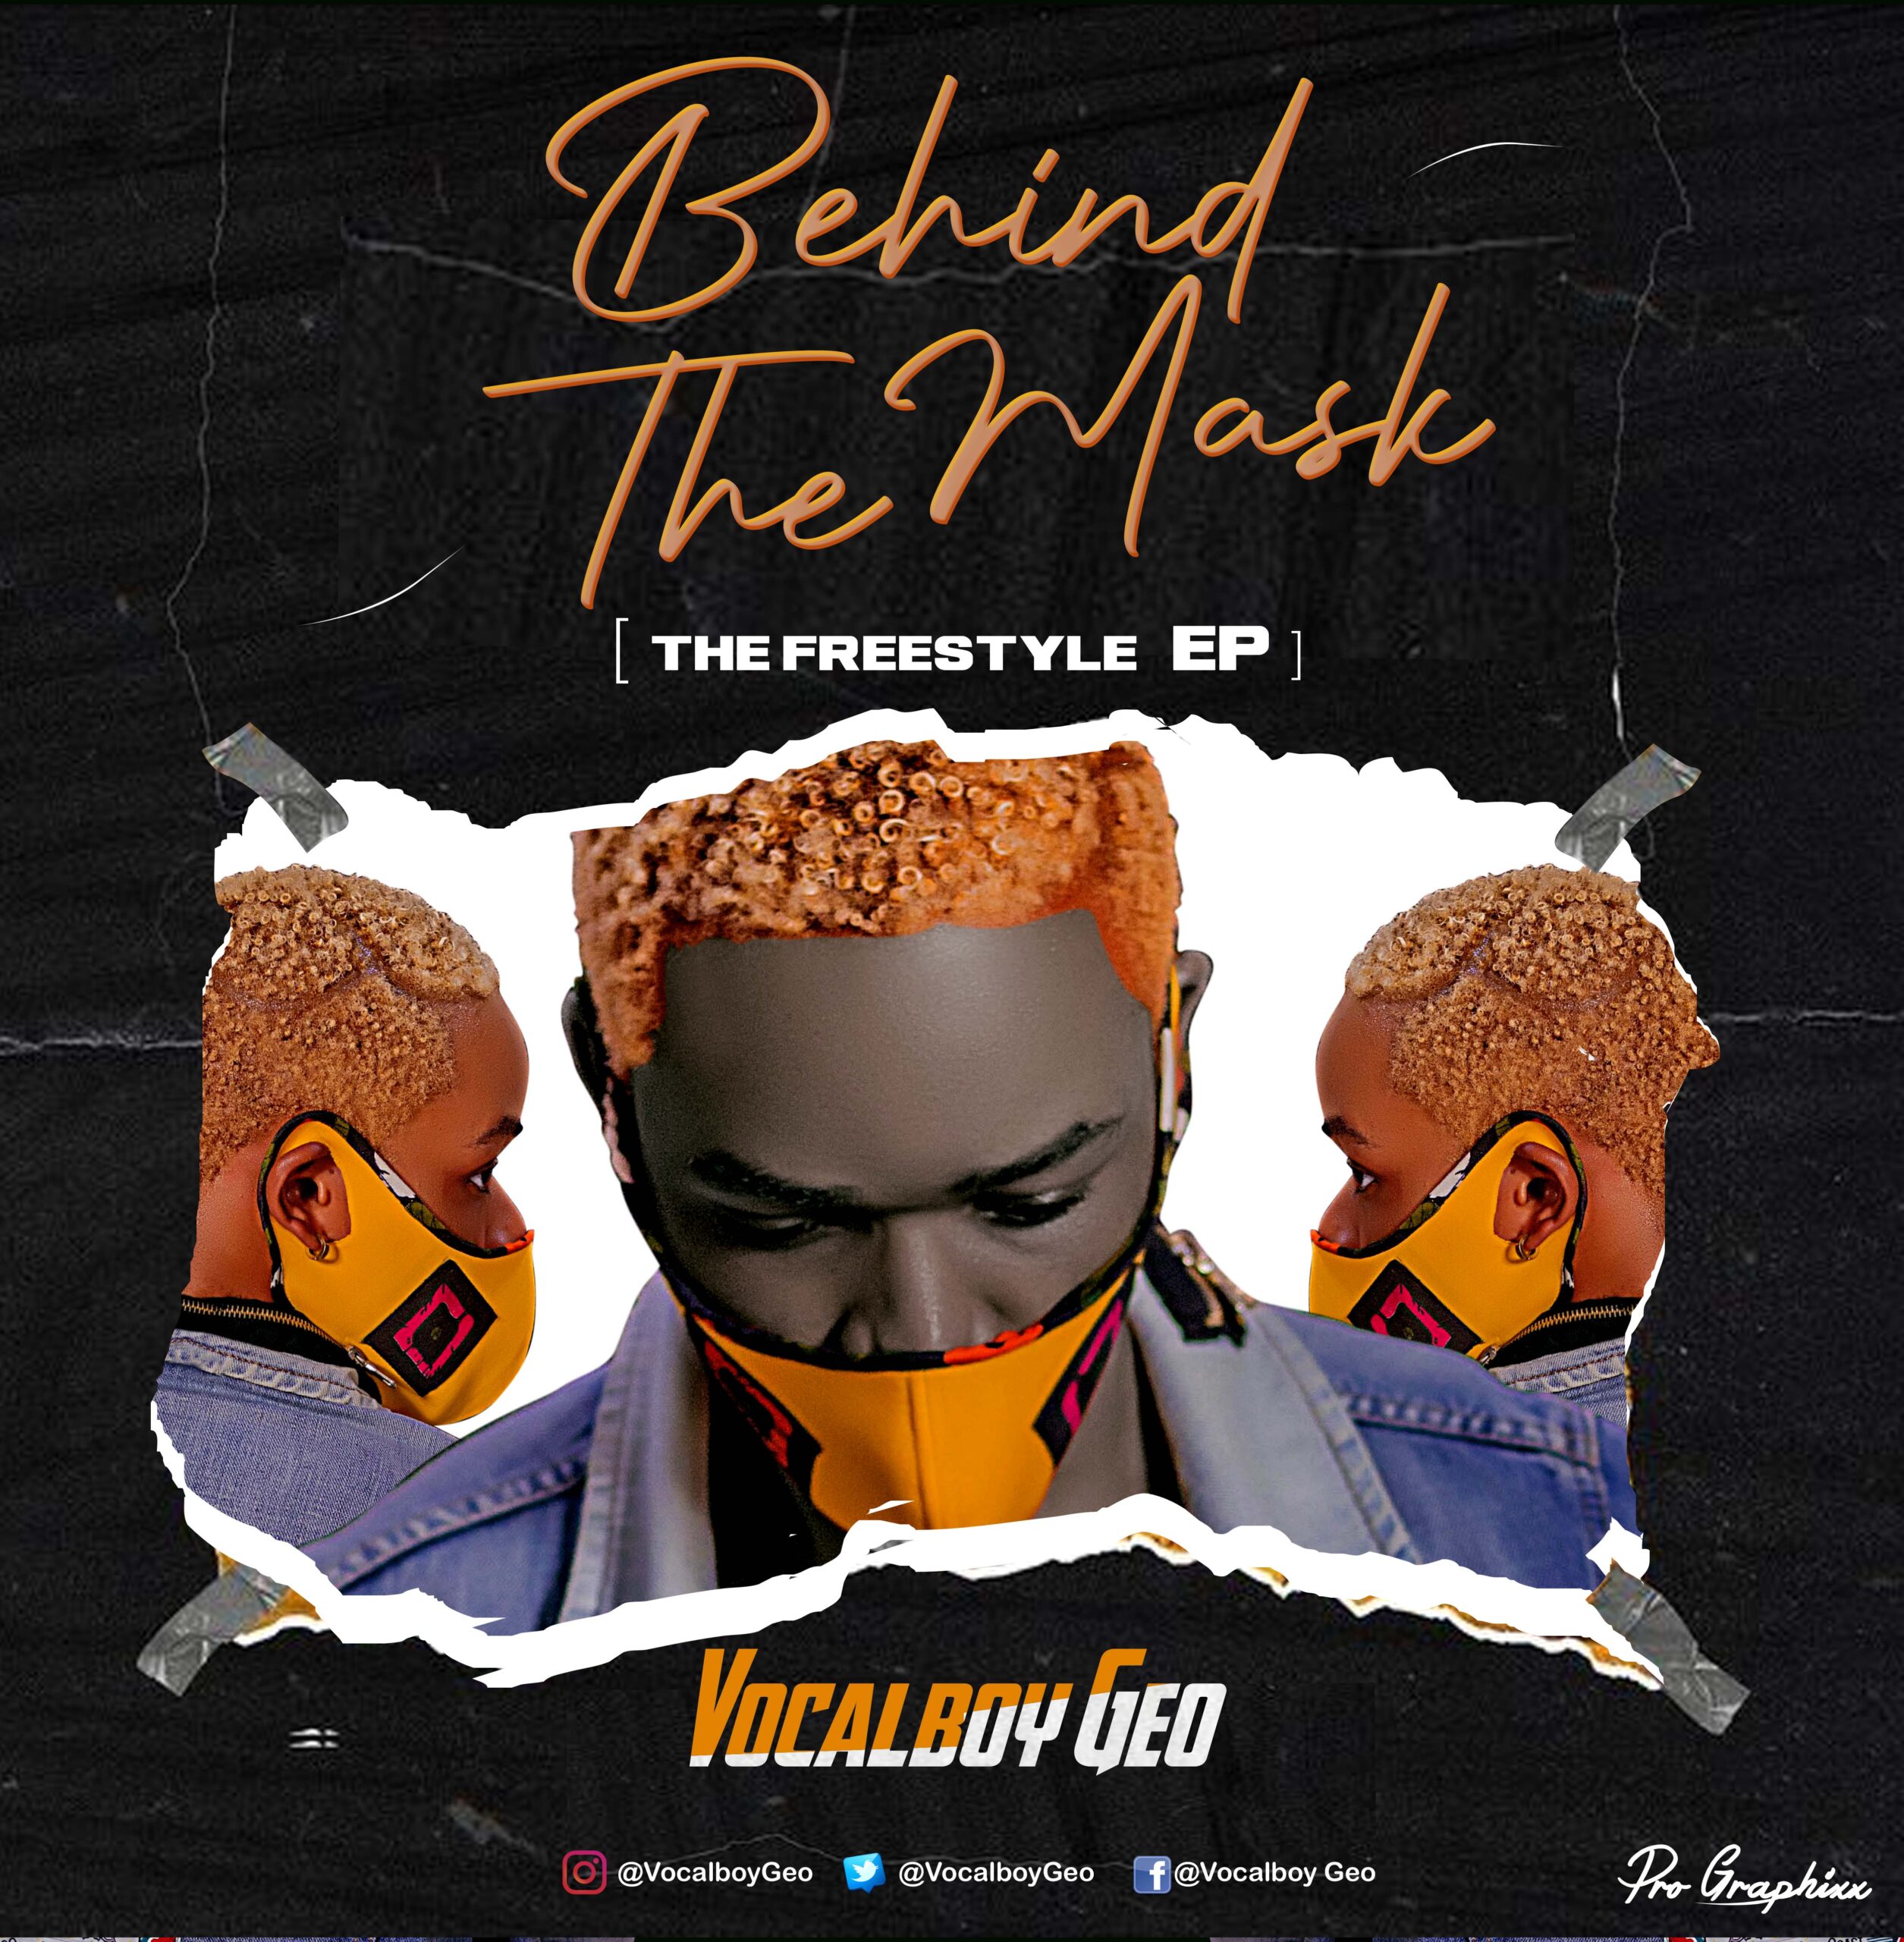 DOWNLOAD FULL EP: Vocalboy Geo – Behind the mask (The Freestyle EP)